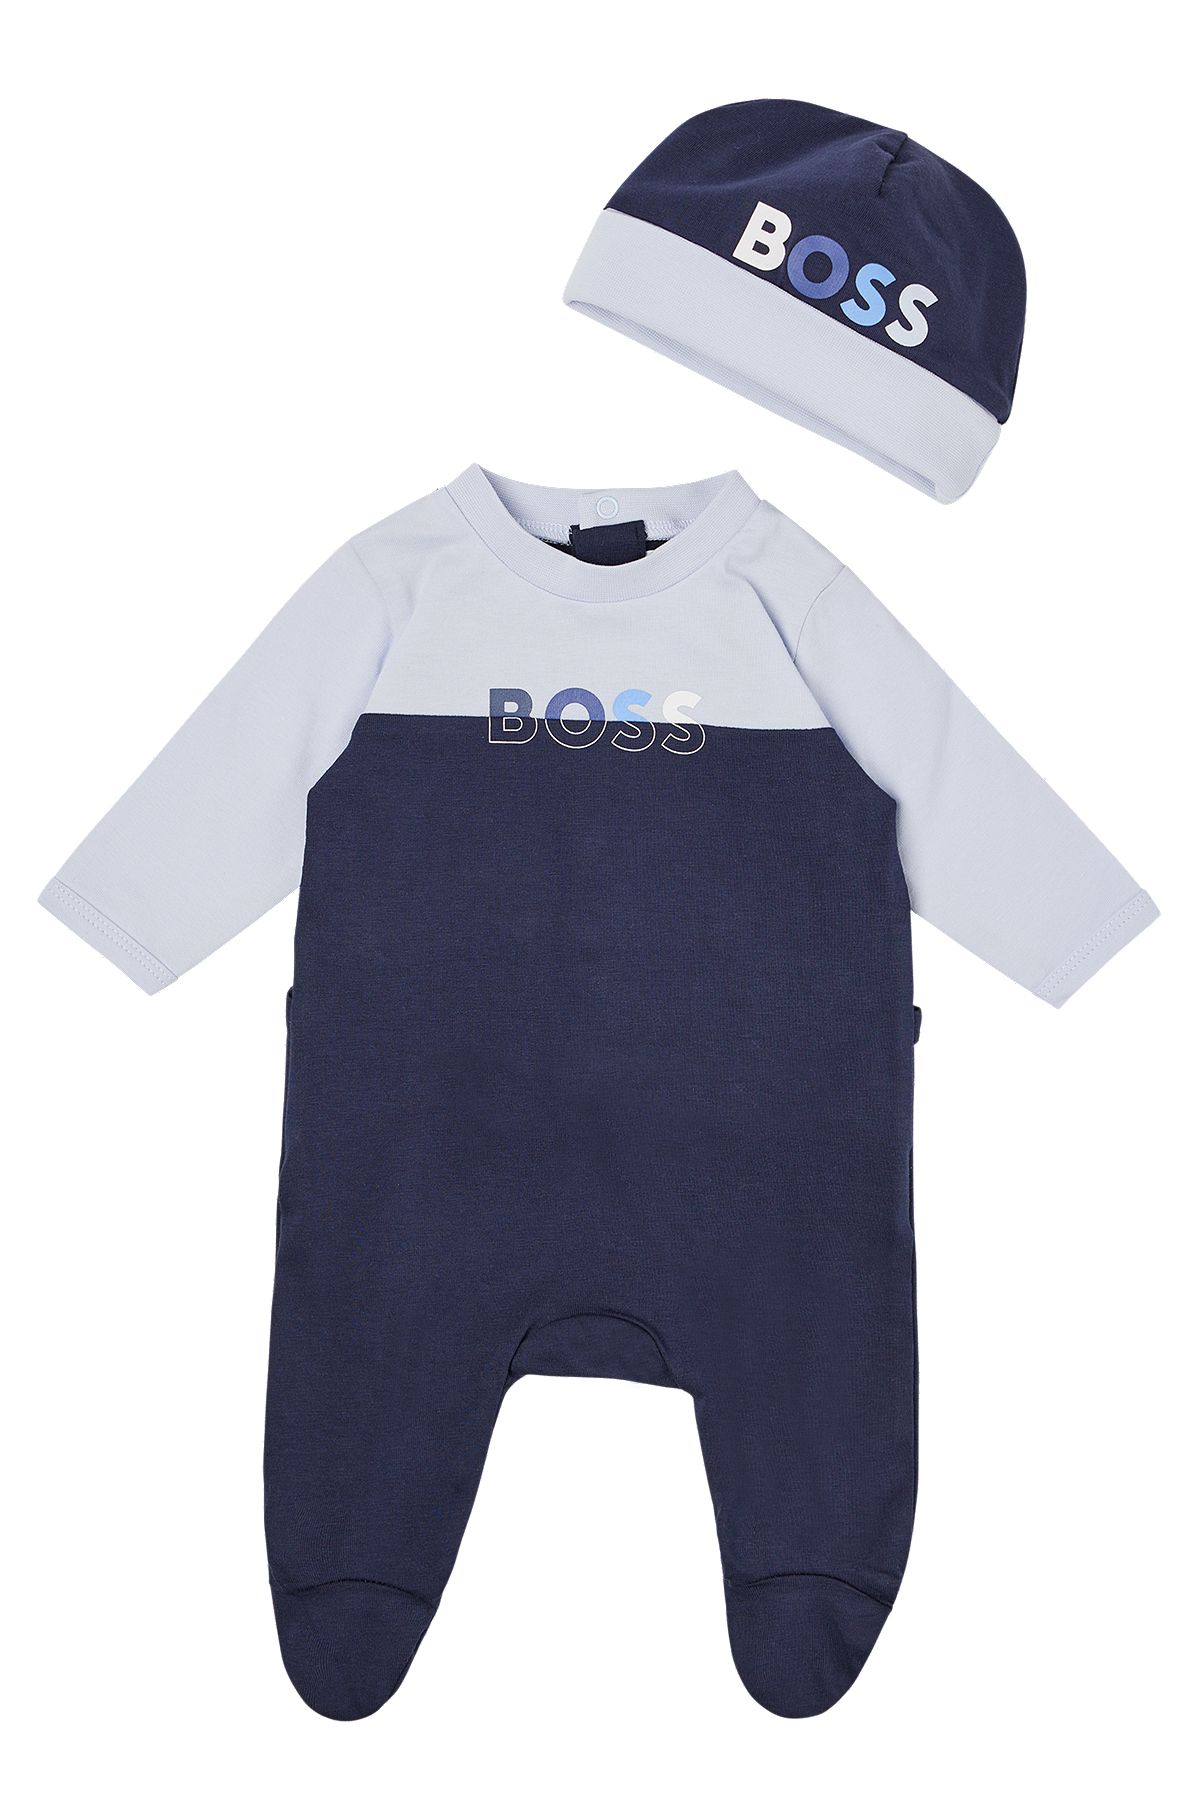 Gift-boxed sleepsuit and hat for babies, Dark Blue